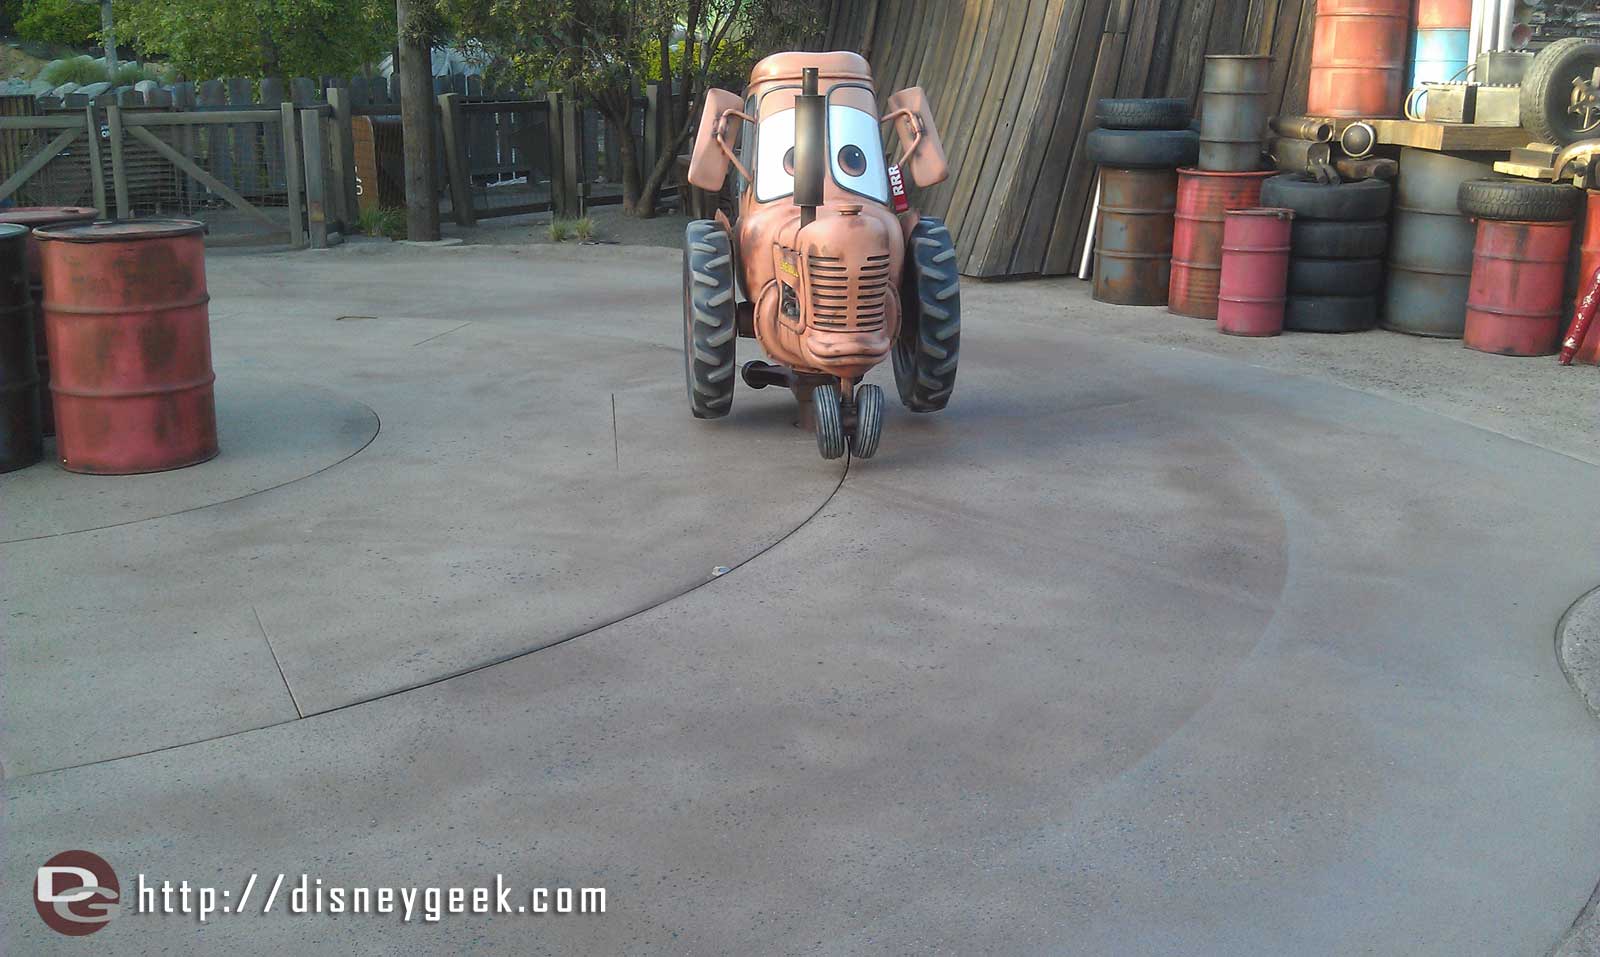 Square dancing with Mater and the baby tractors in CarsLand